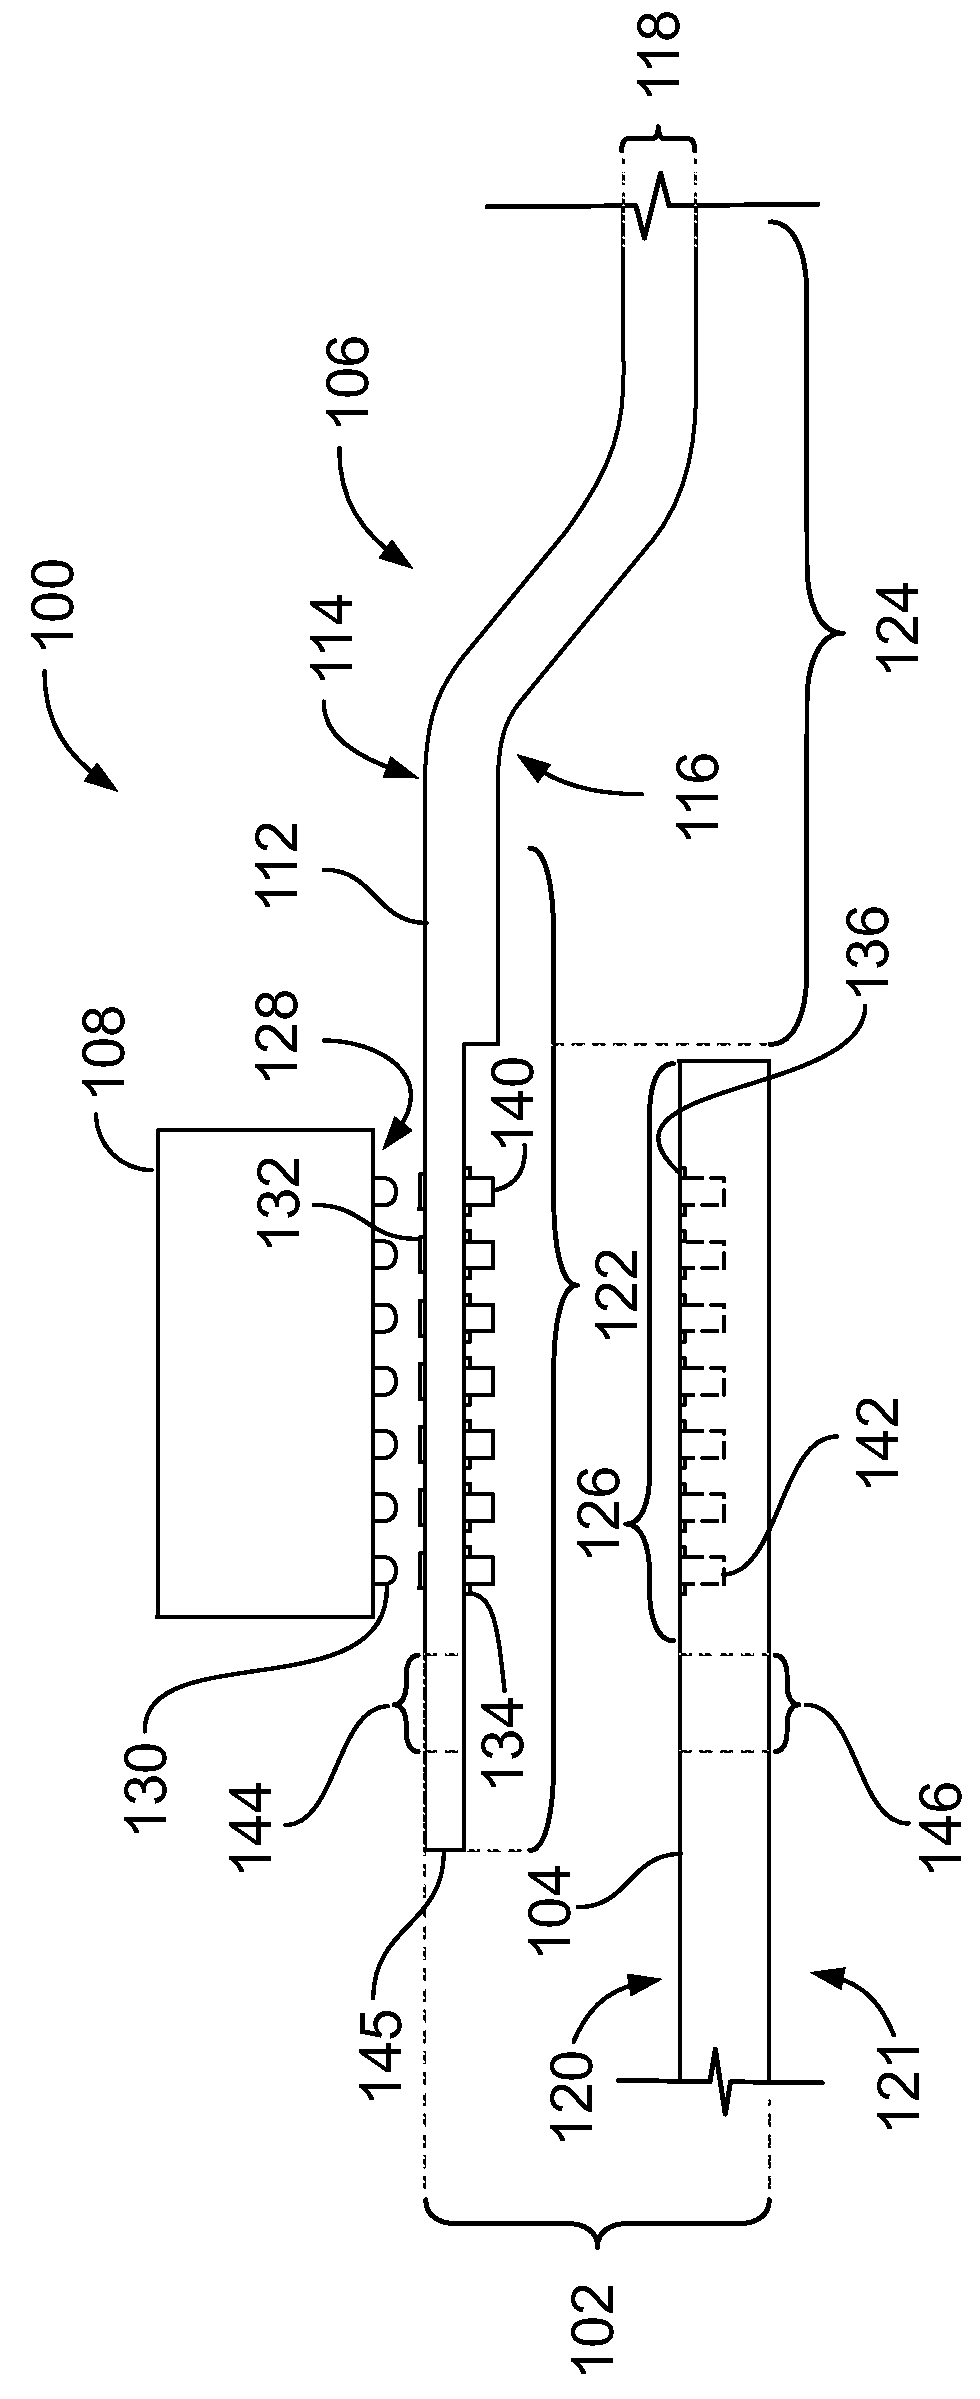 Flexible printed circuit connector and connector assembly including the same